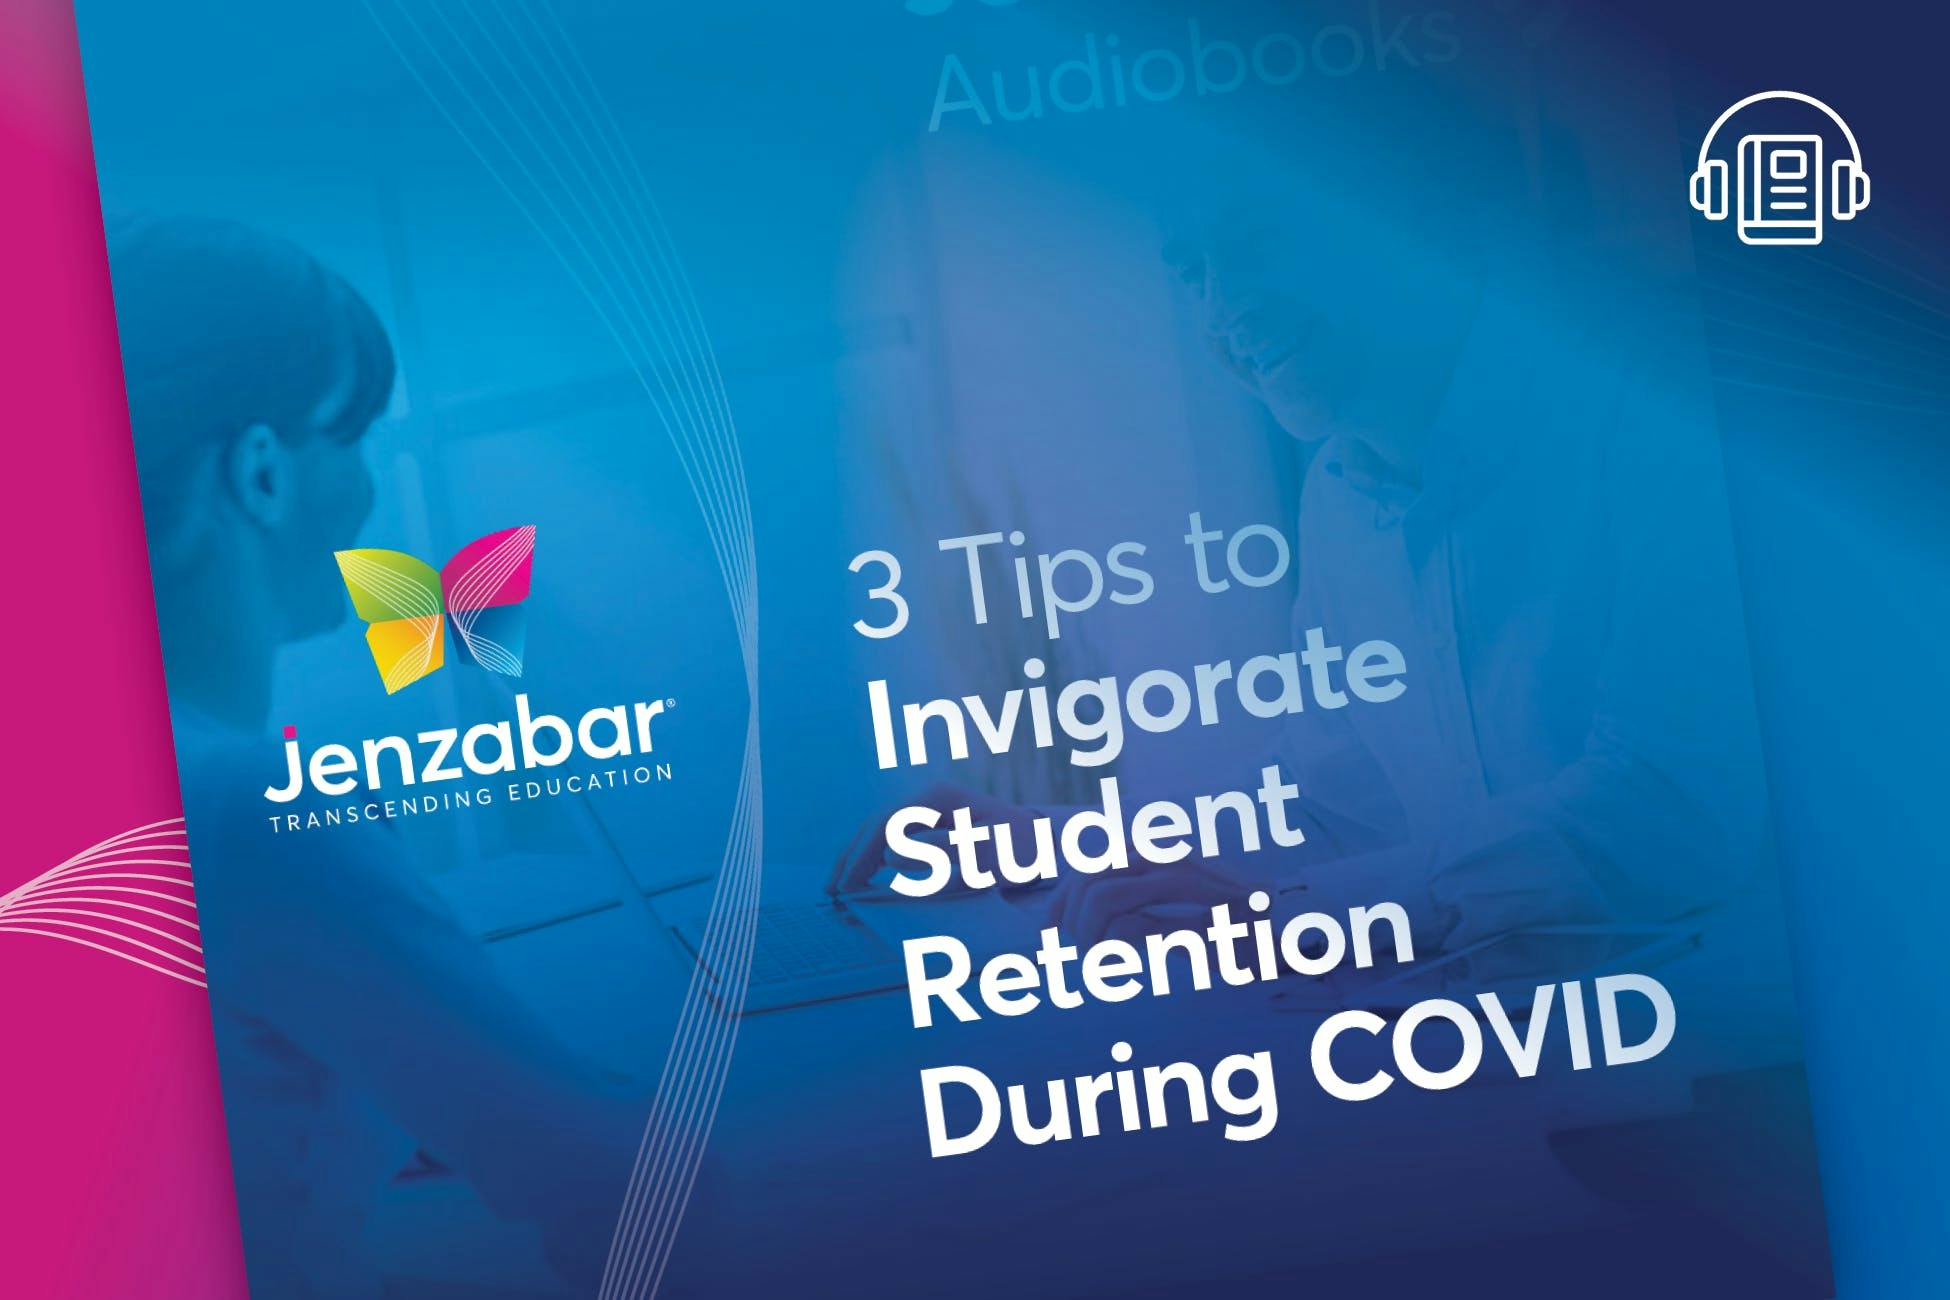 Audiobook: 3 Tips to Invigorate Student Retention During COVID-19